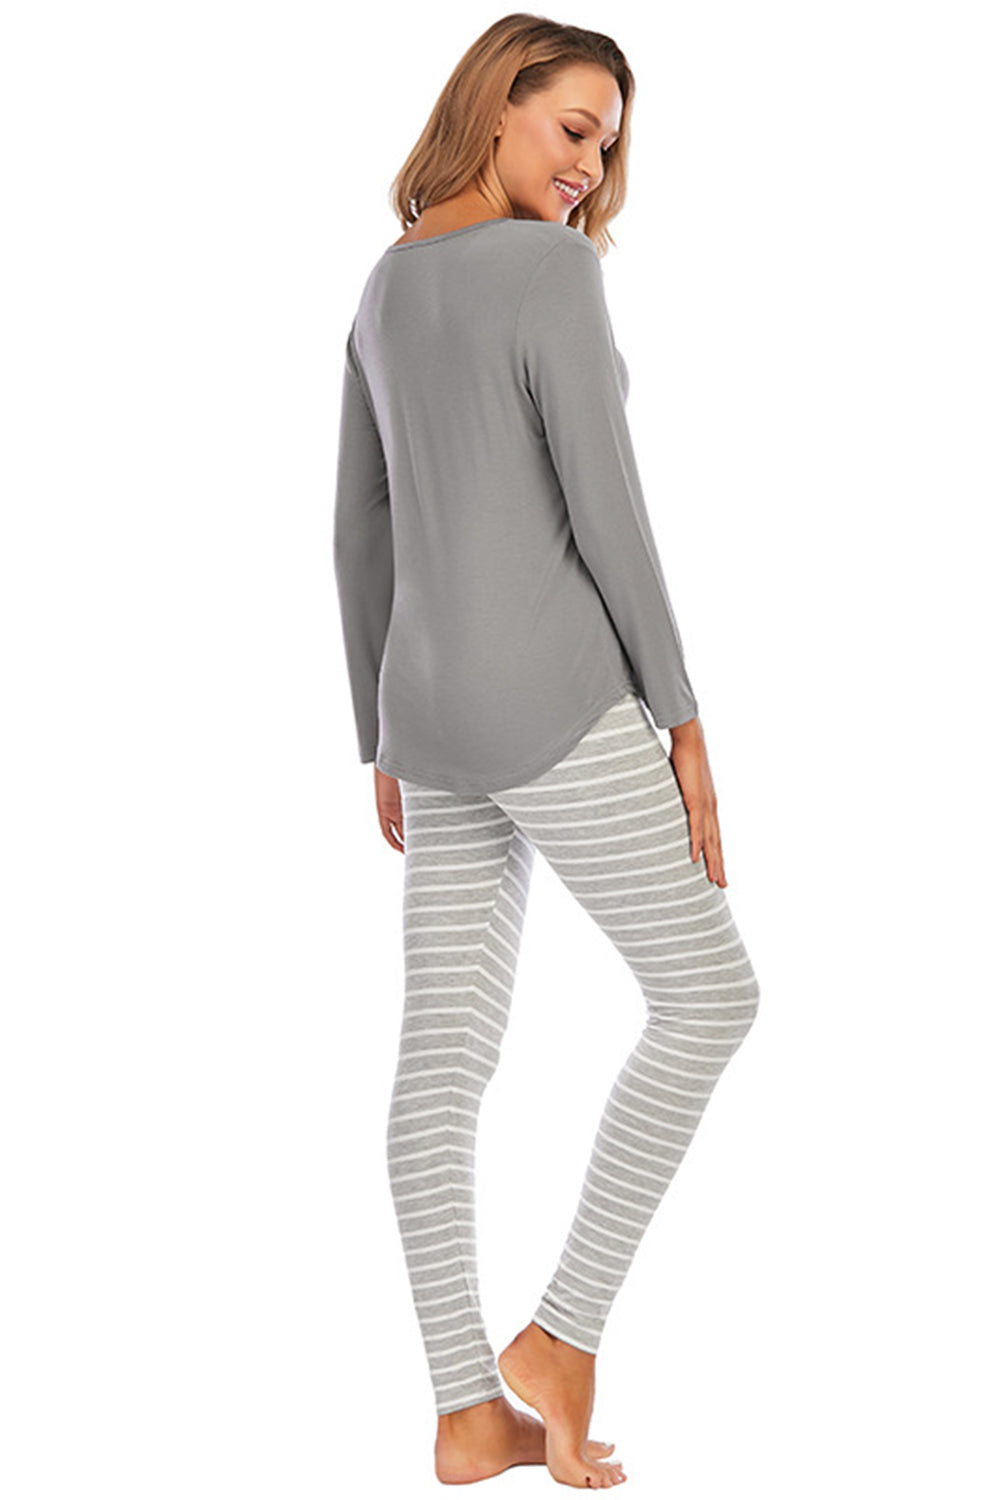 Graphic Round Neck Top and Striped Pants Set - Tophatter Deals and Online Shopping - Electronics, Jewelry, Beauty, Health, Gadgets, Fashion - Tophatter's Discounts & Offers - tophatters